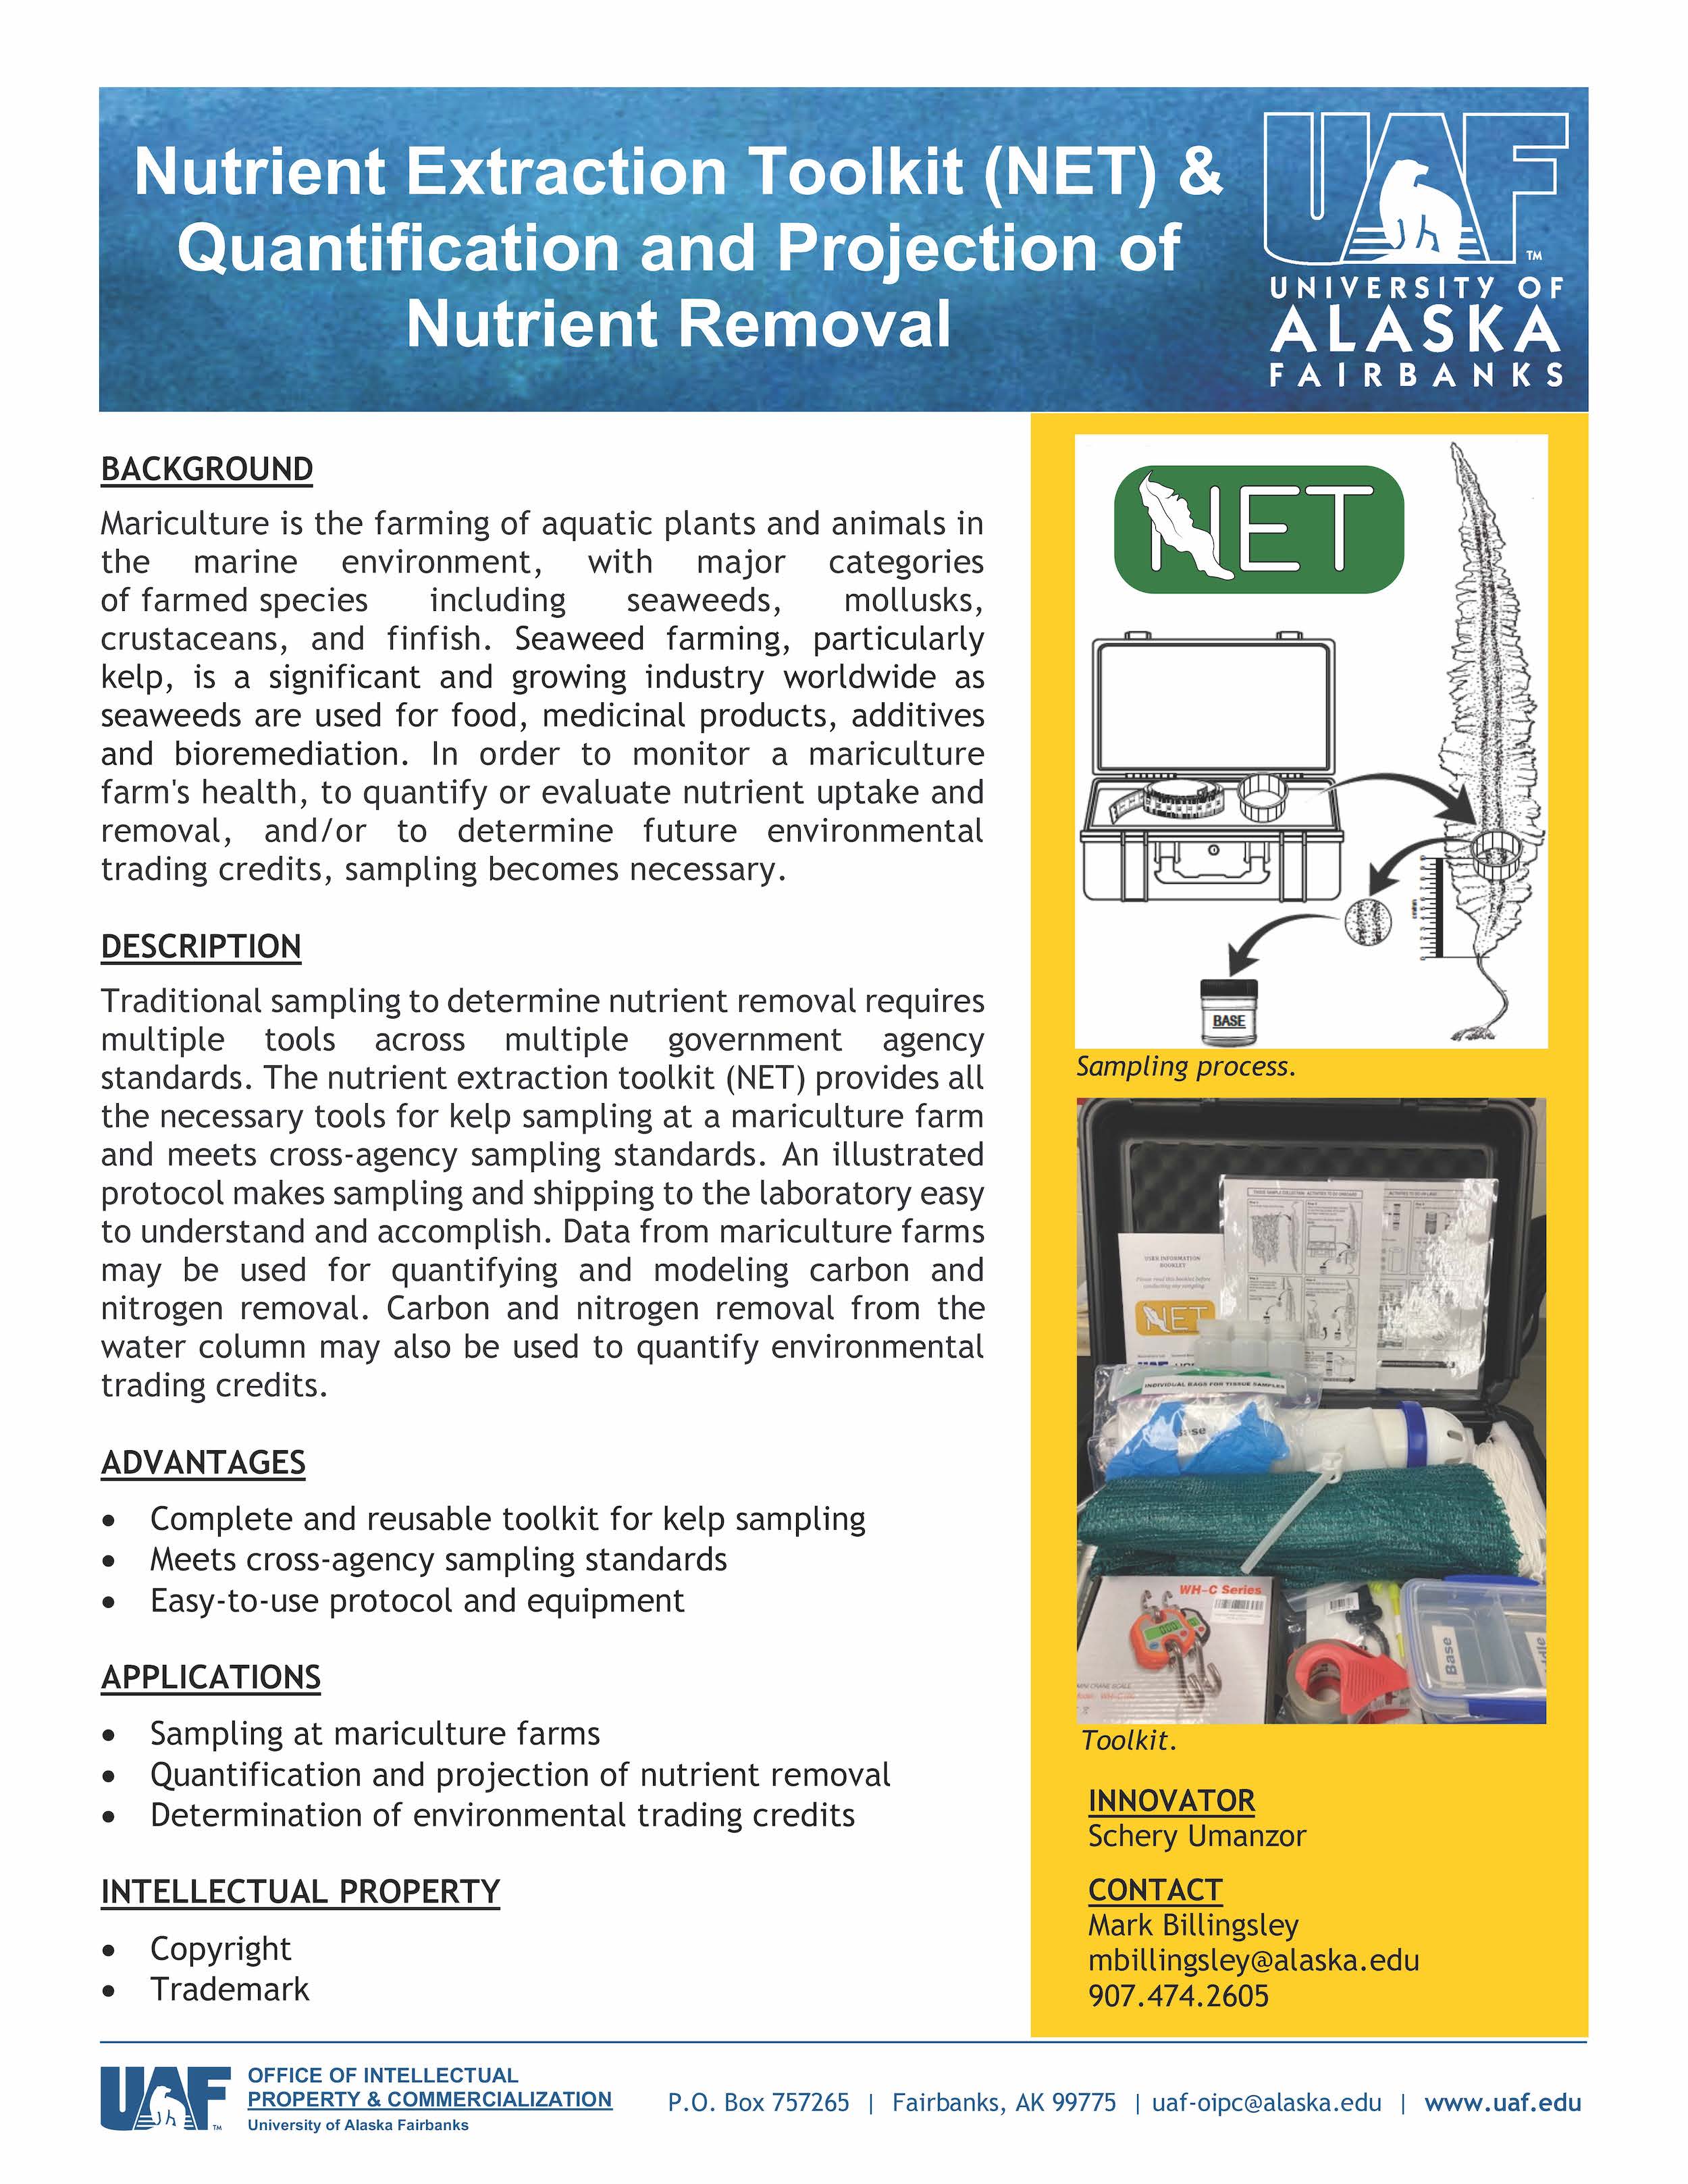 UAF Technology - Nutrient Extraction Toolkit and Quantification and Projection of Nutrient Removal